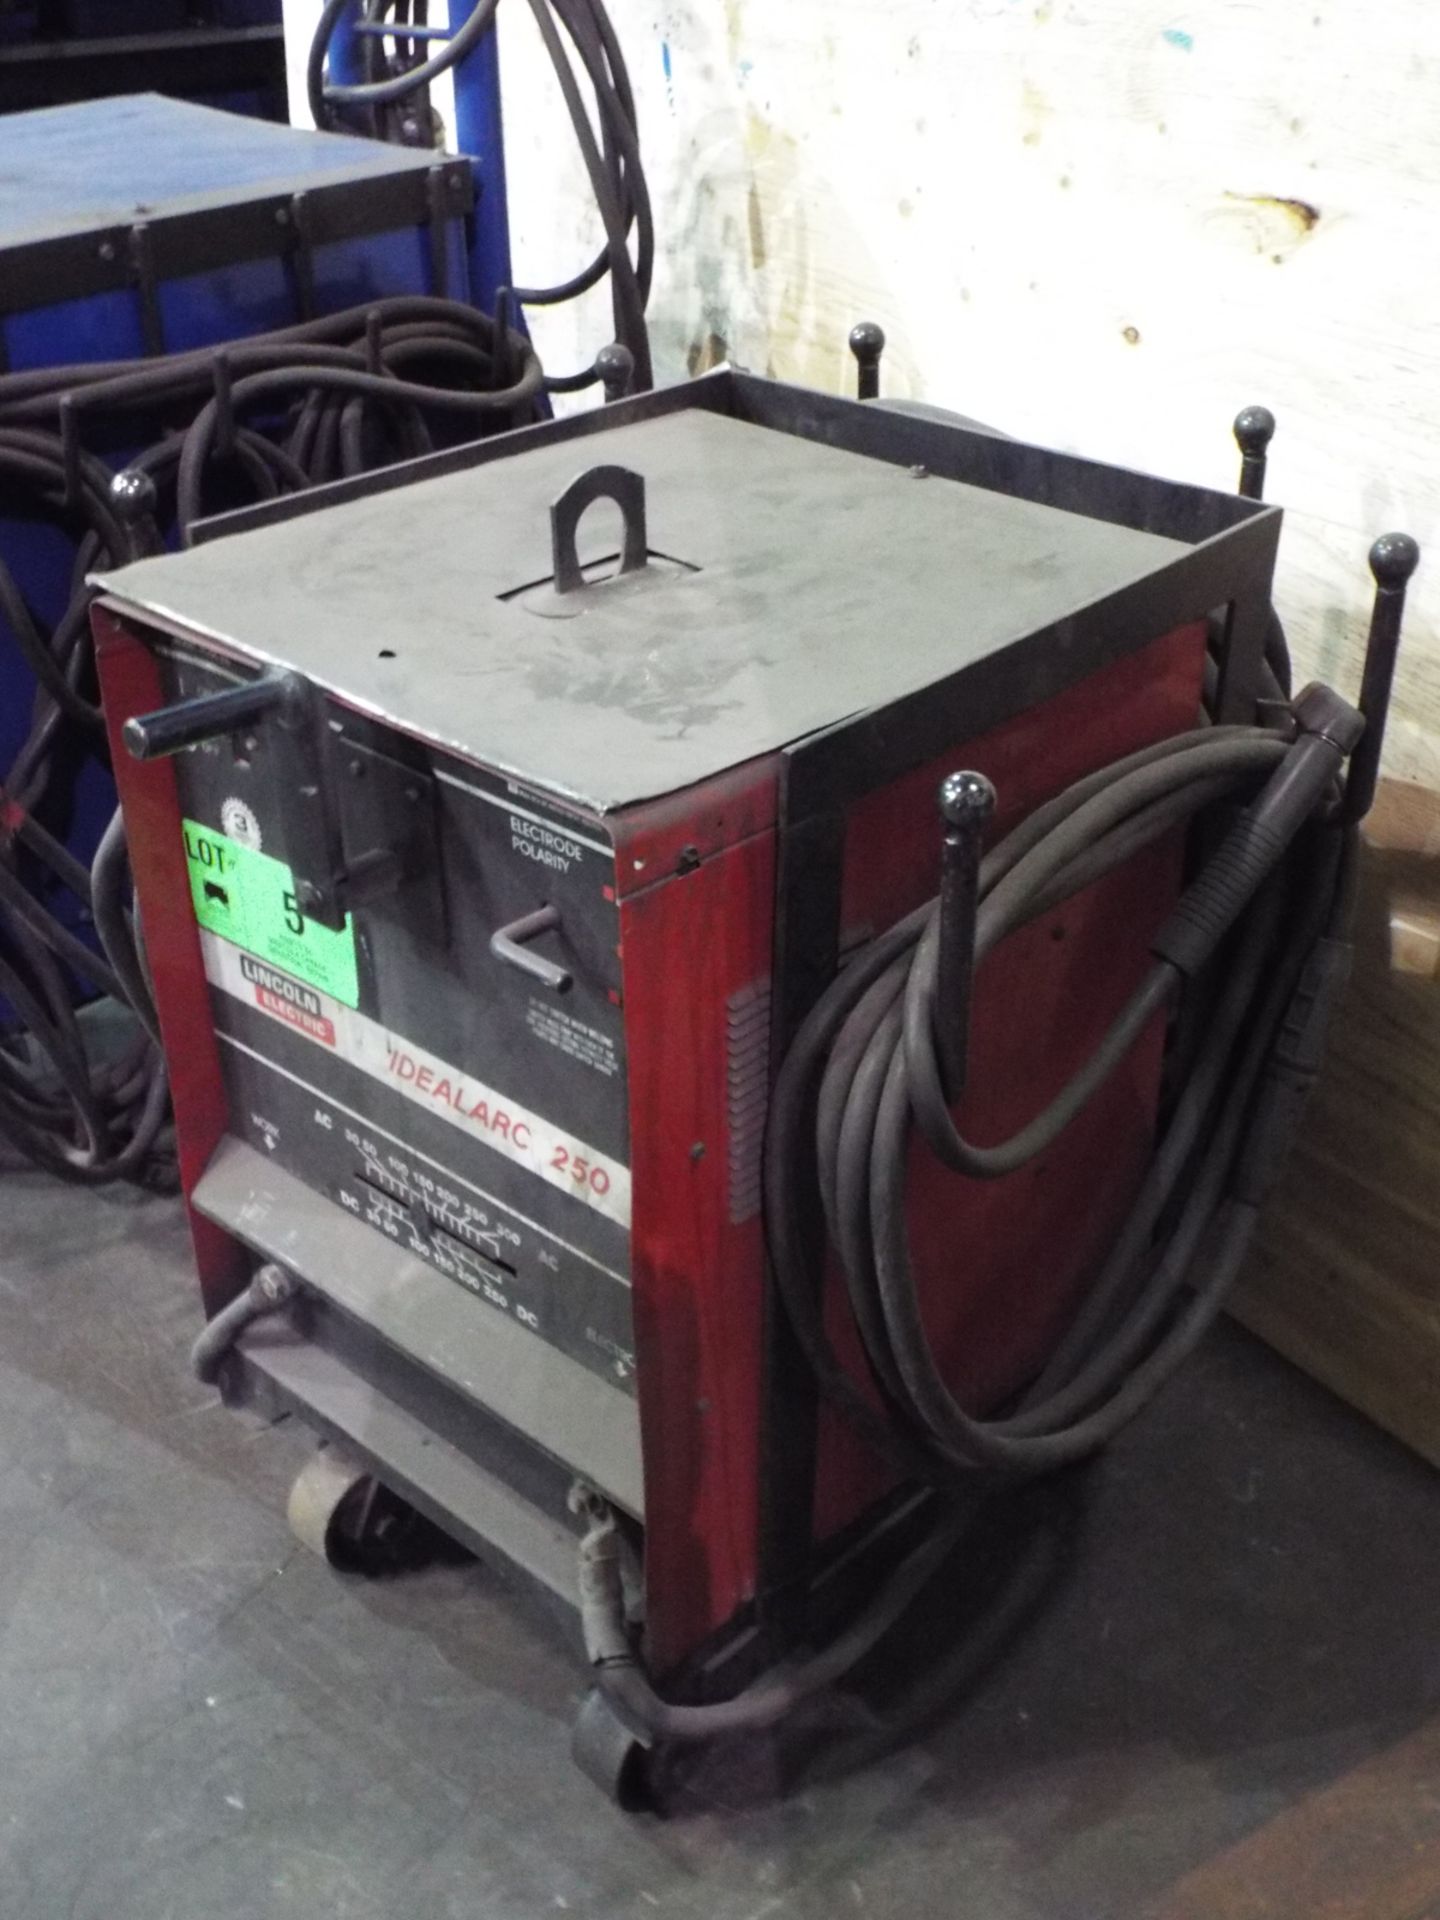 LINCOLN ELECTRIC IDEALARC 250 STICK WELDER WITH CABLES AND GUN, S/N: N/A - Image 2 of 2